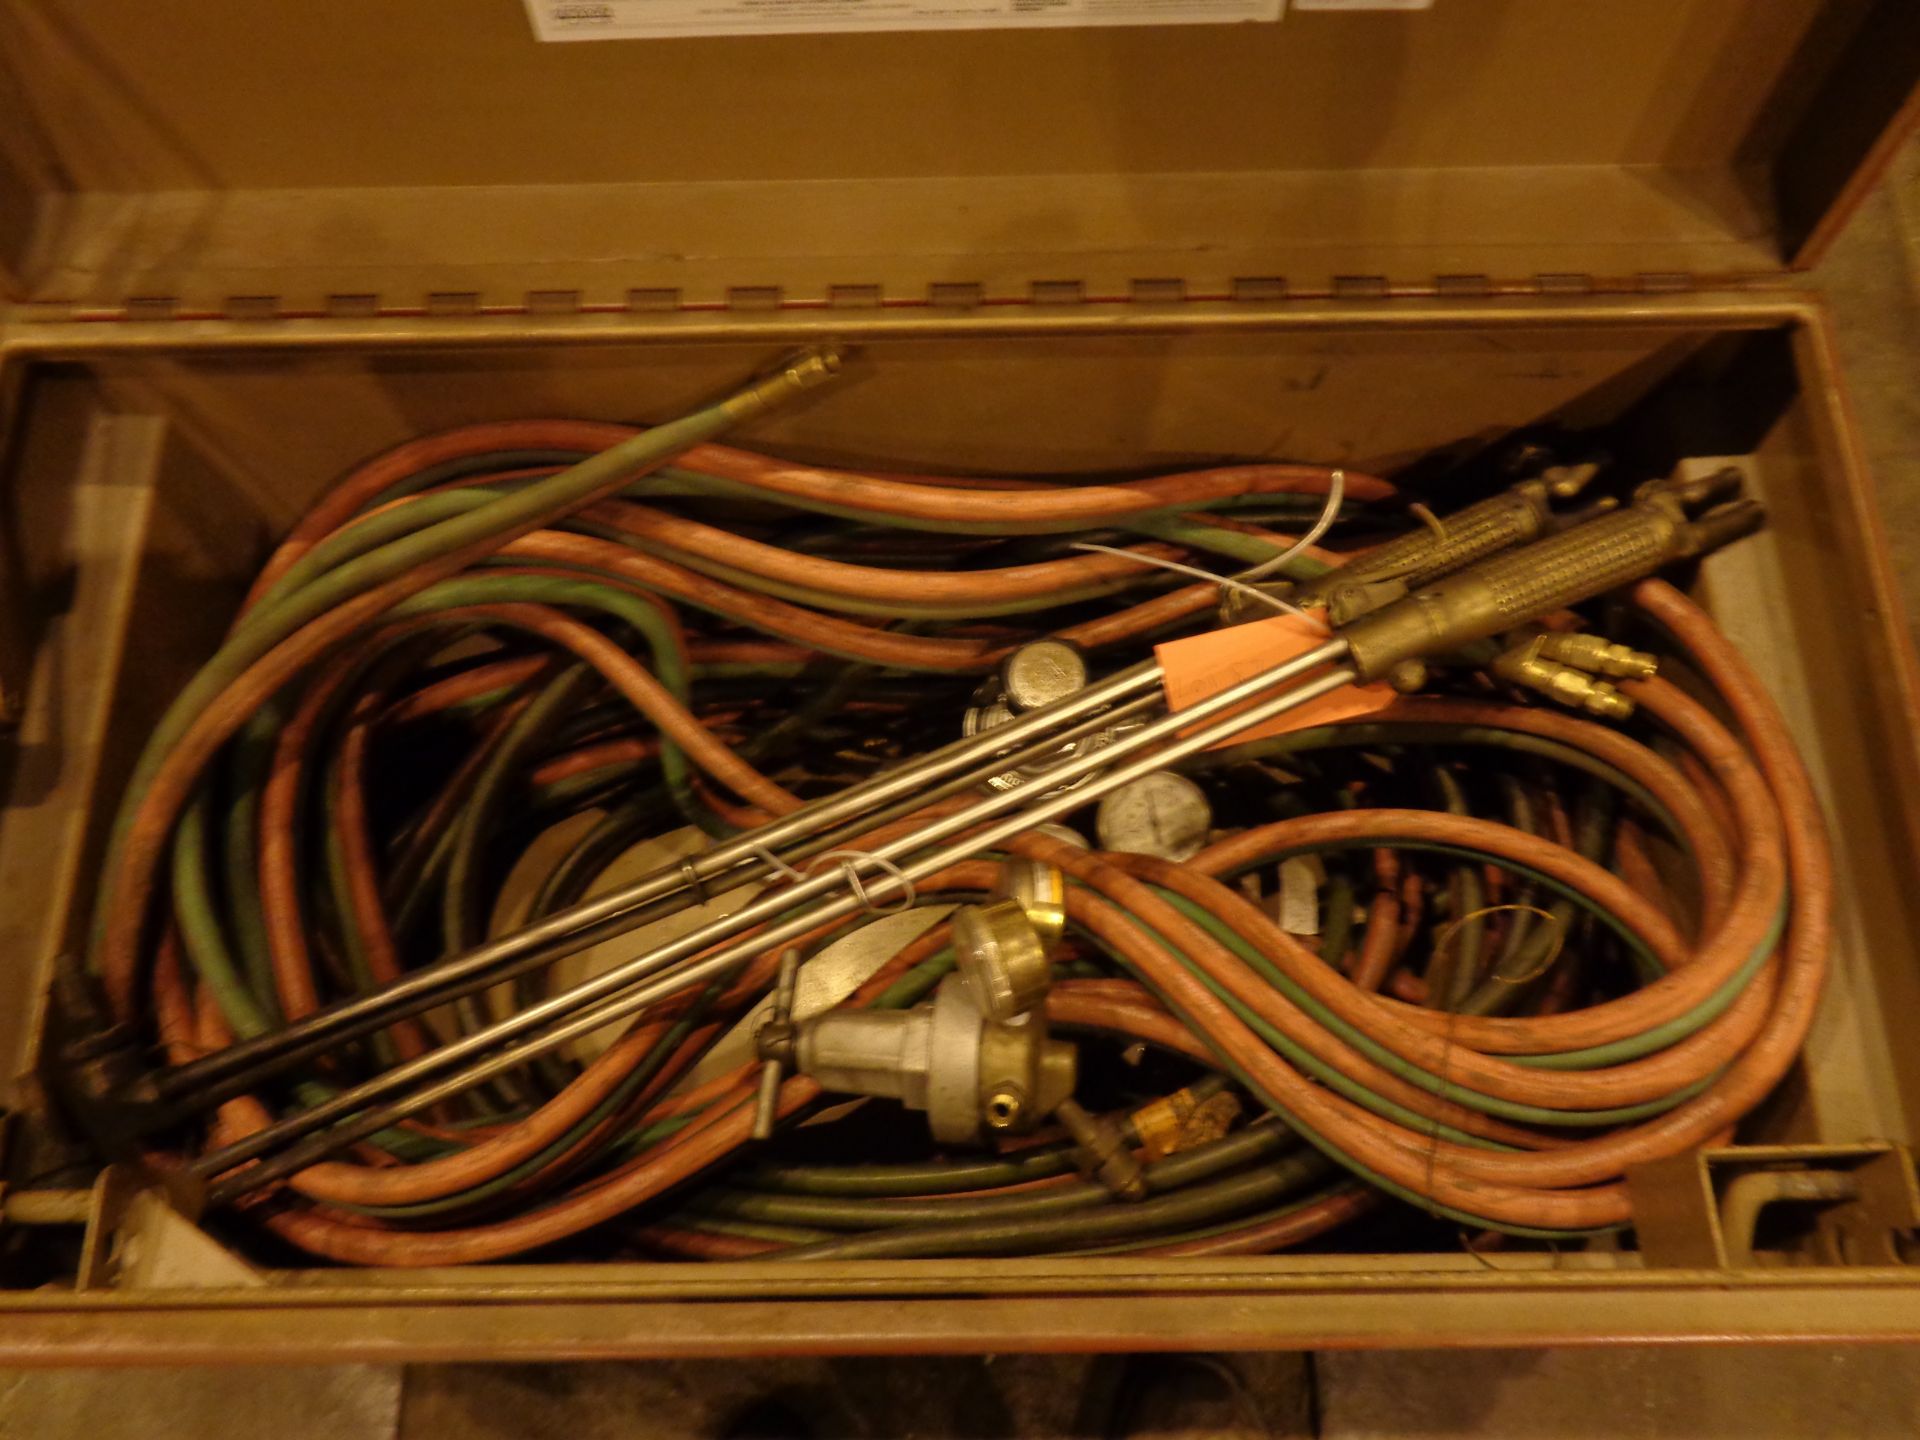 Long Reach Oxygen Acclean Torches with Hoses and Gauges (87) - Image 4 of 12